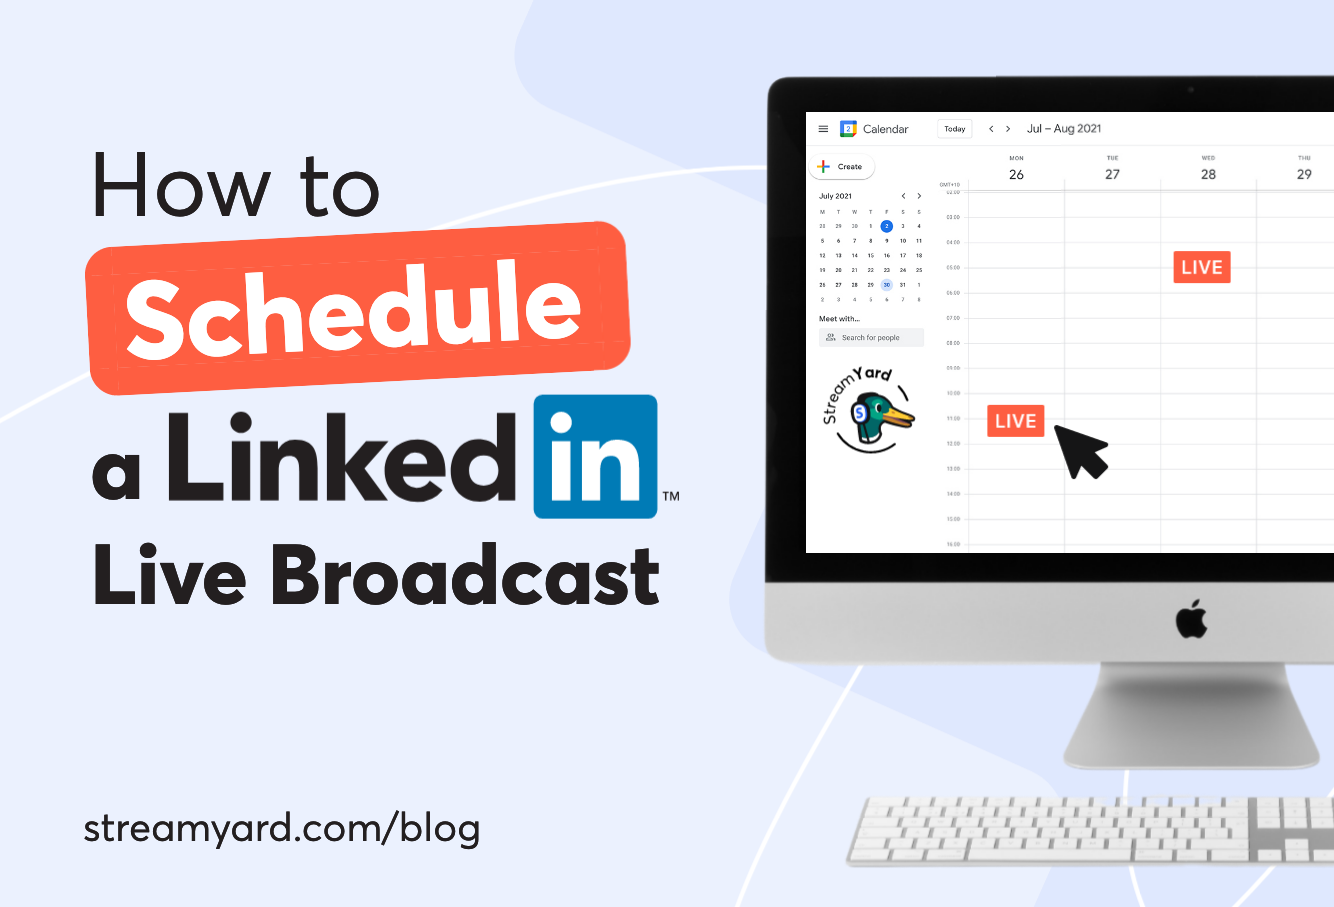 How To Schedule A LinkedIn Live Broadcast